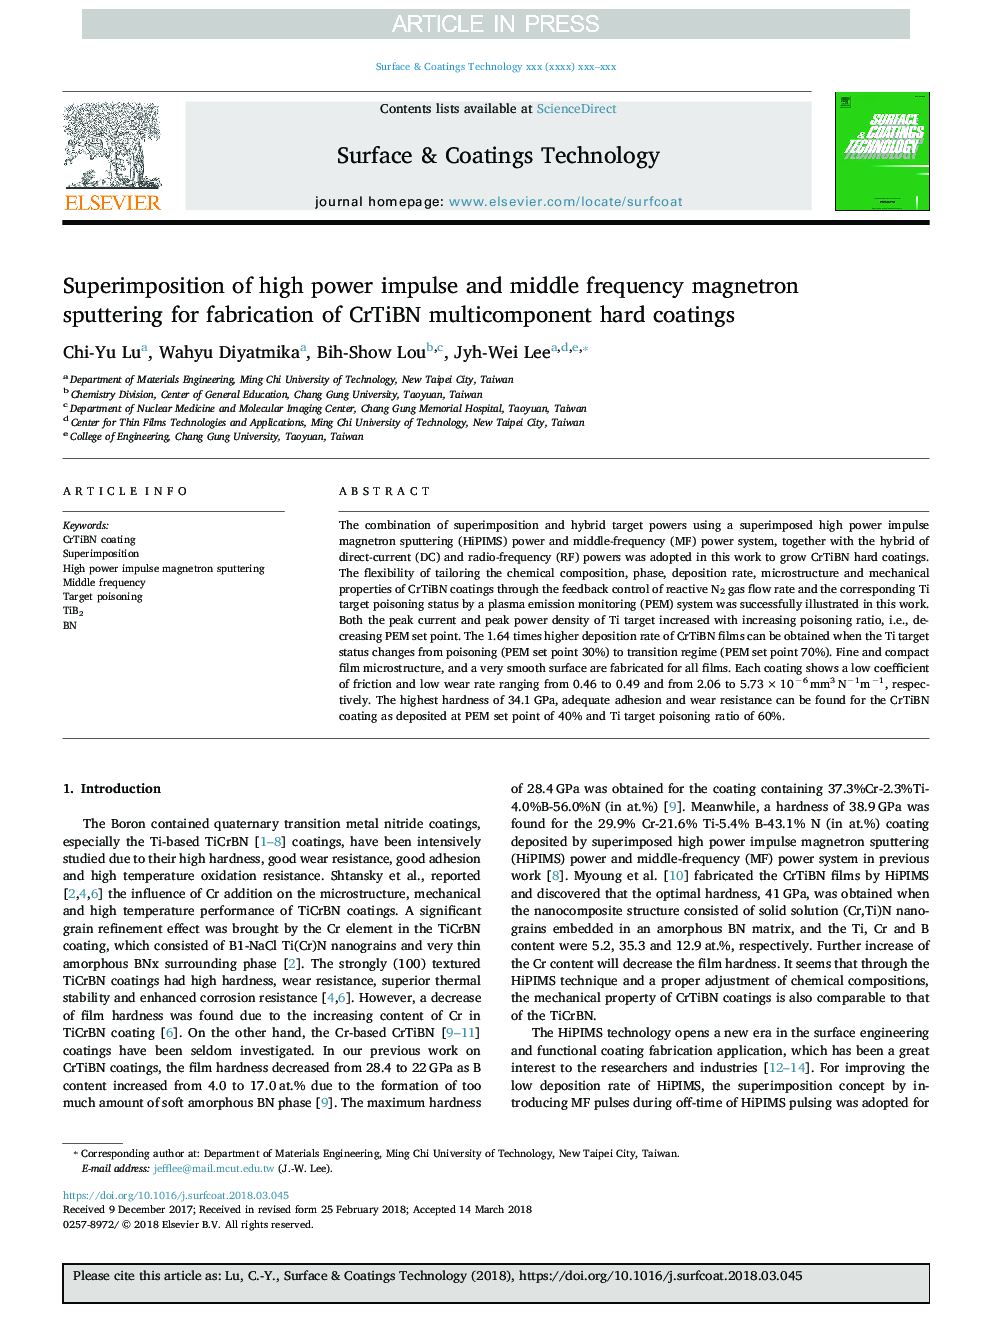 Superimposition of high power impulse and middle frequency magnetron sputtering for fabrication of CrTiBN multicomponent hard coatings